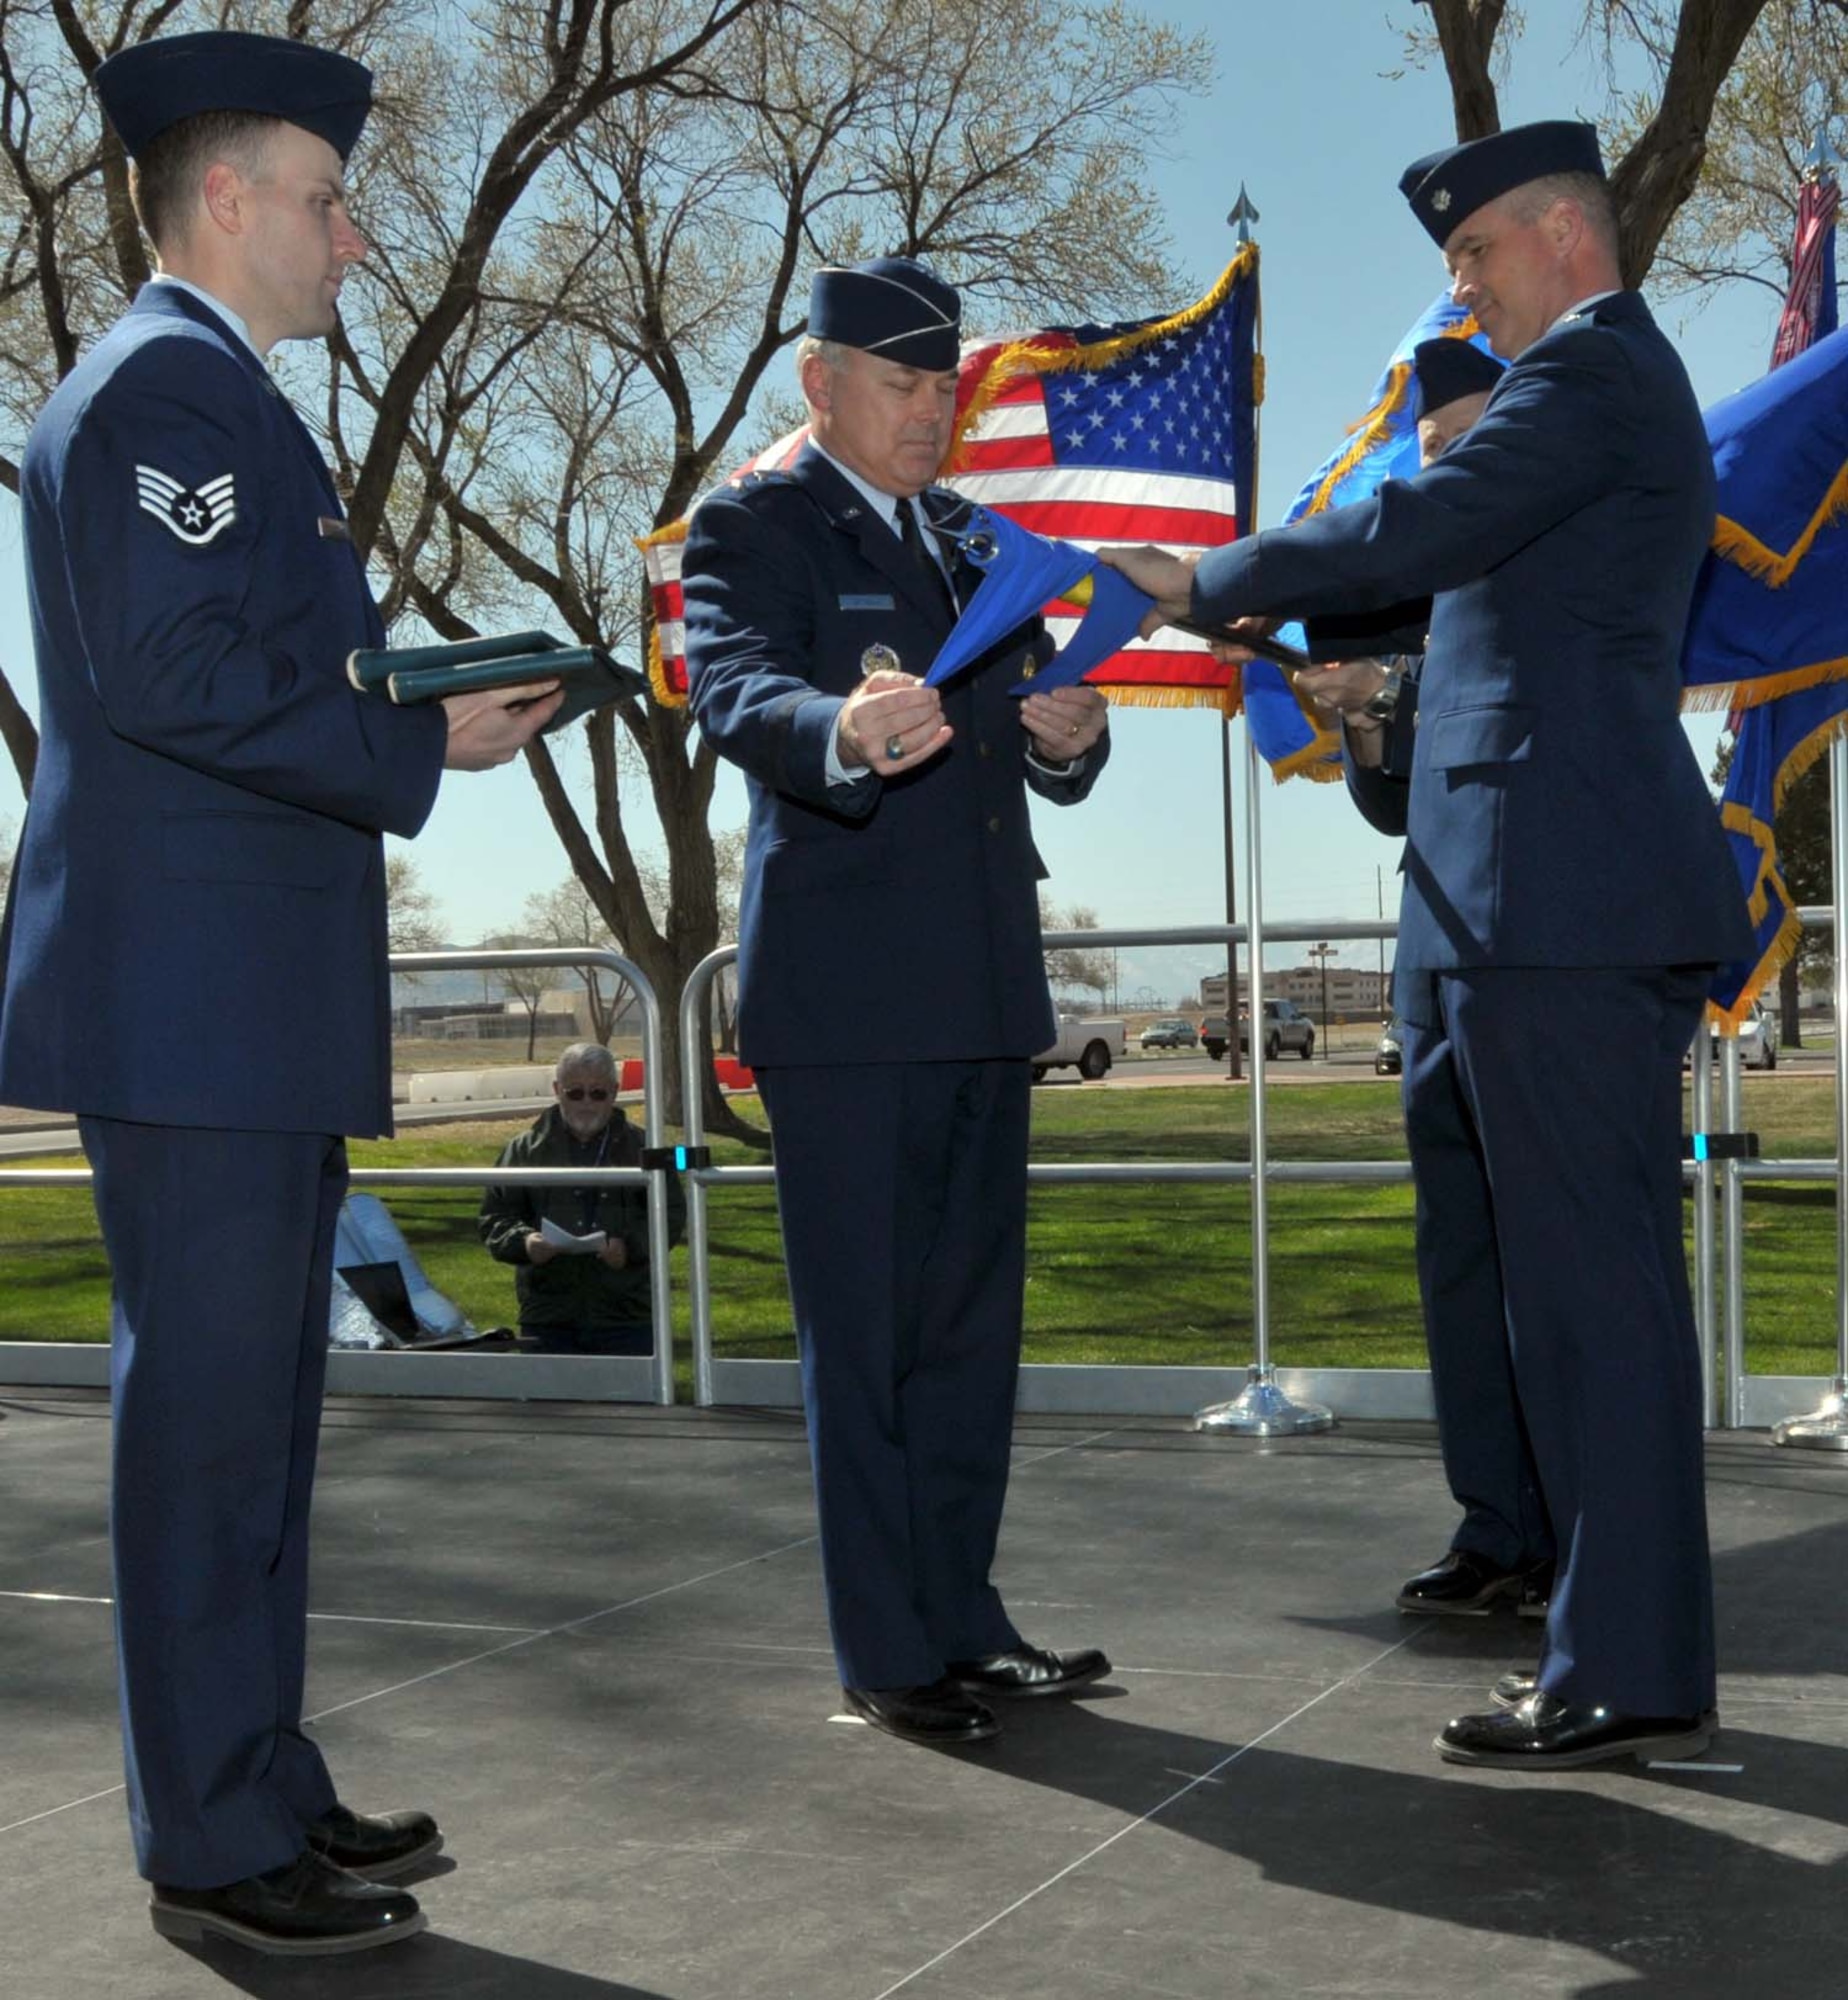 Maj. Gen. Stephen T. Sargeant, Air Force Operational Test and Evaluation Center Commander, furls the AFOTEC Detachment 3 flag with help from Lt. Col. Christopher A. Hawes, AFOTEC Det. 3 Commander, and SSgt. Justin Schoenthal during an April 5 inactivation ceremony at Kirtland Air Force Base, N.M.
